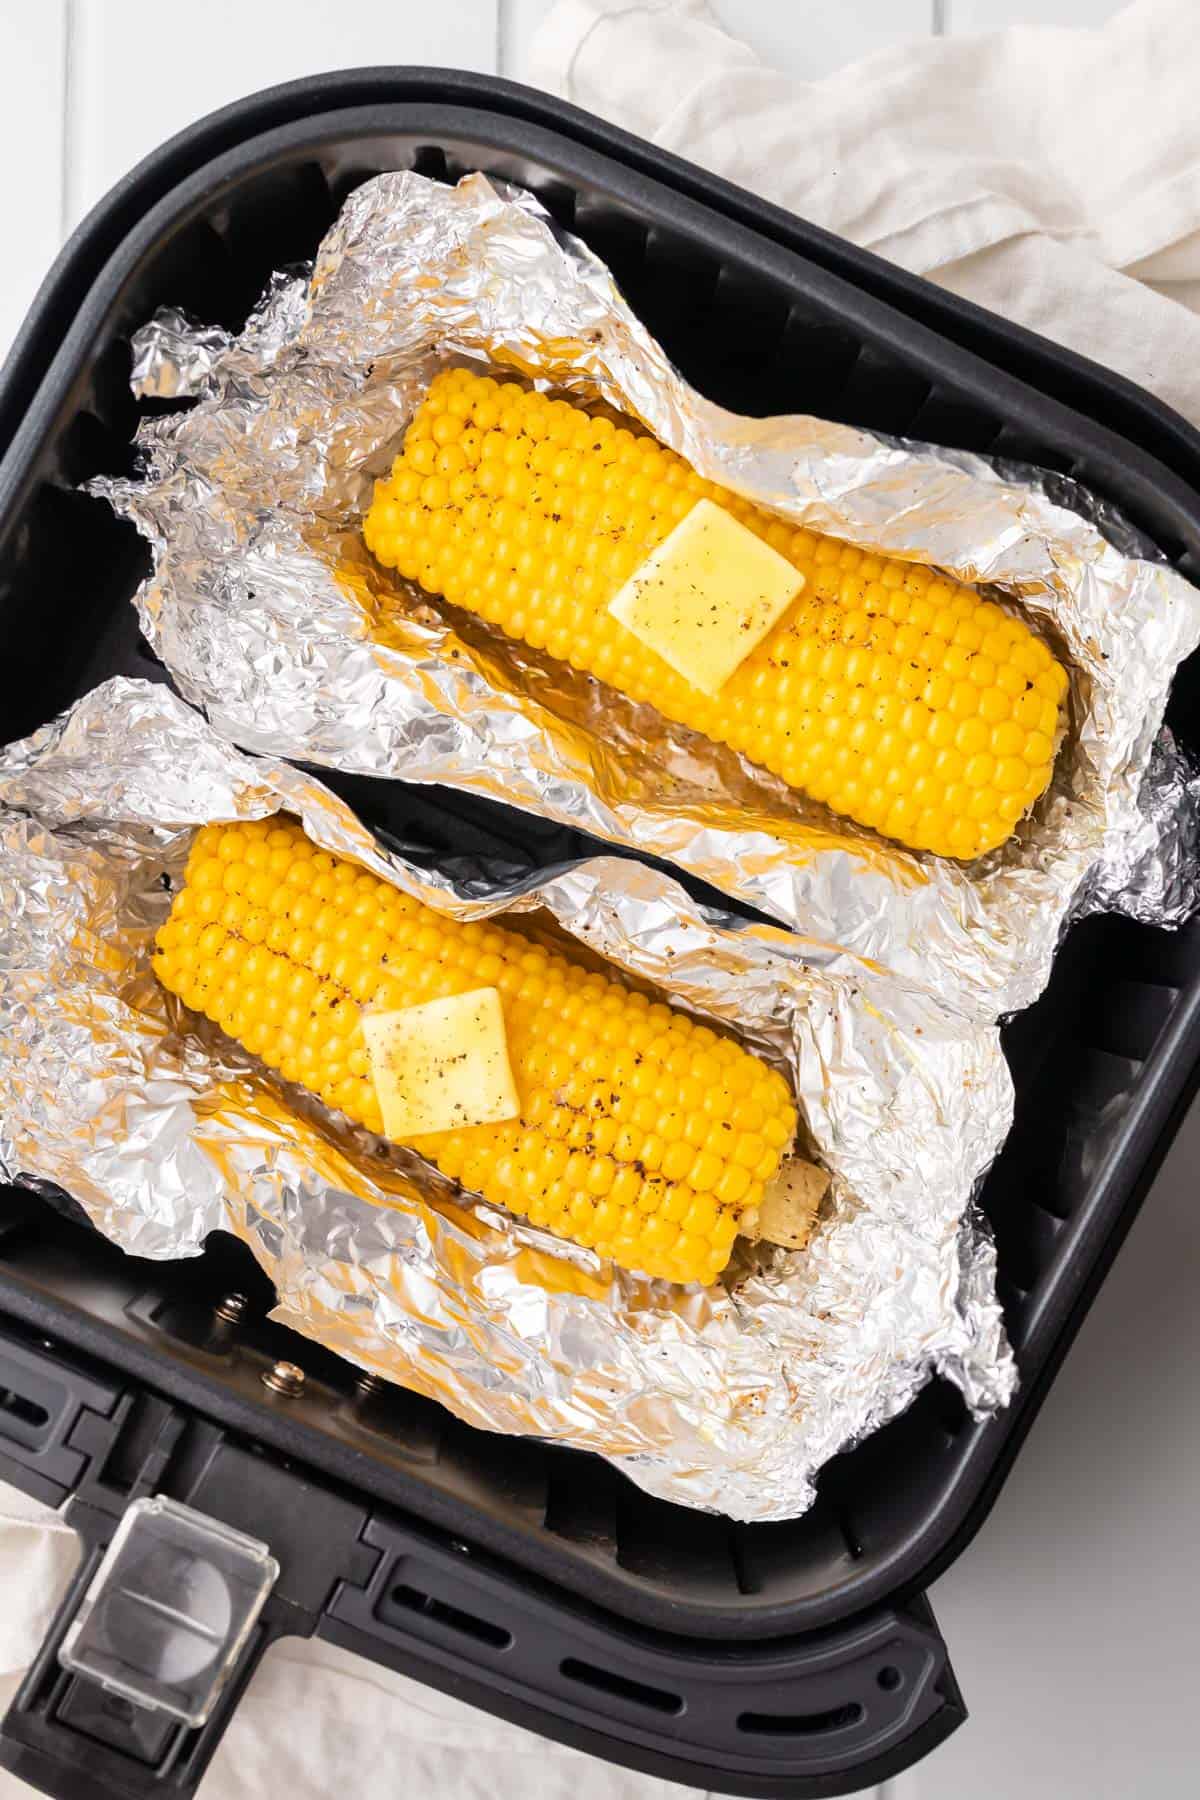 two corn cobs unwrapped in the air fryer basket garnished with butter and black pepper